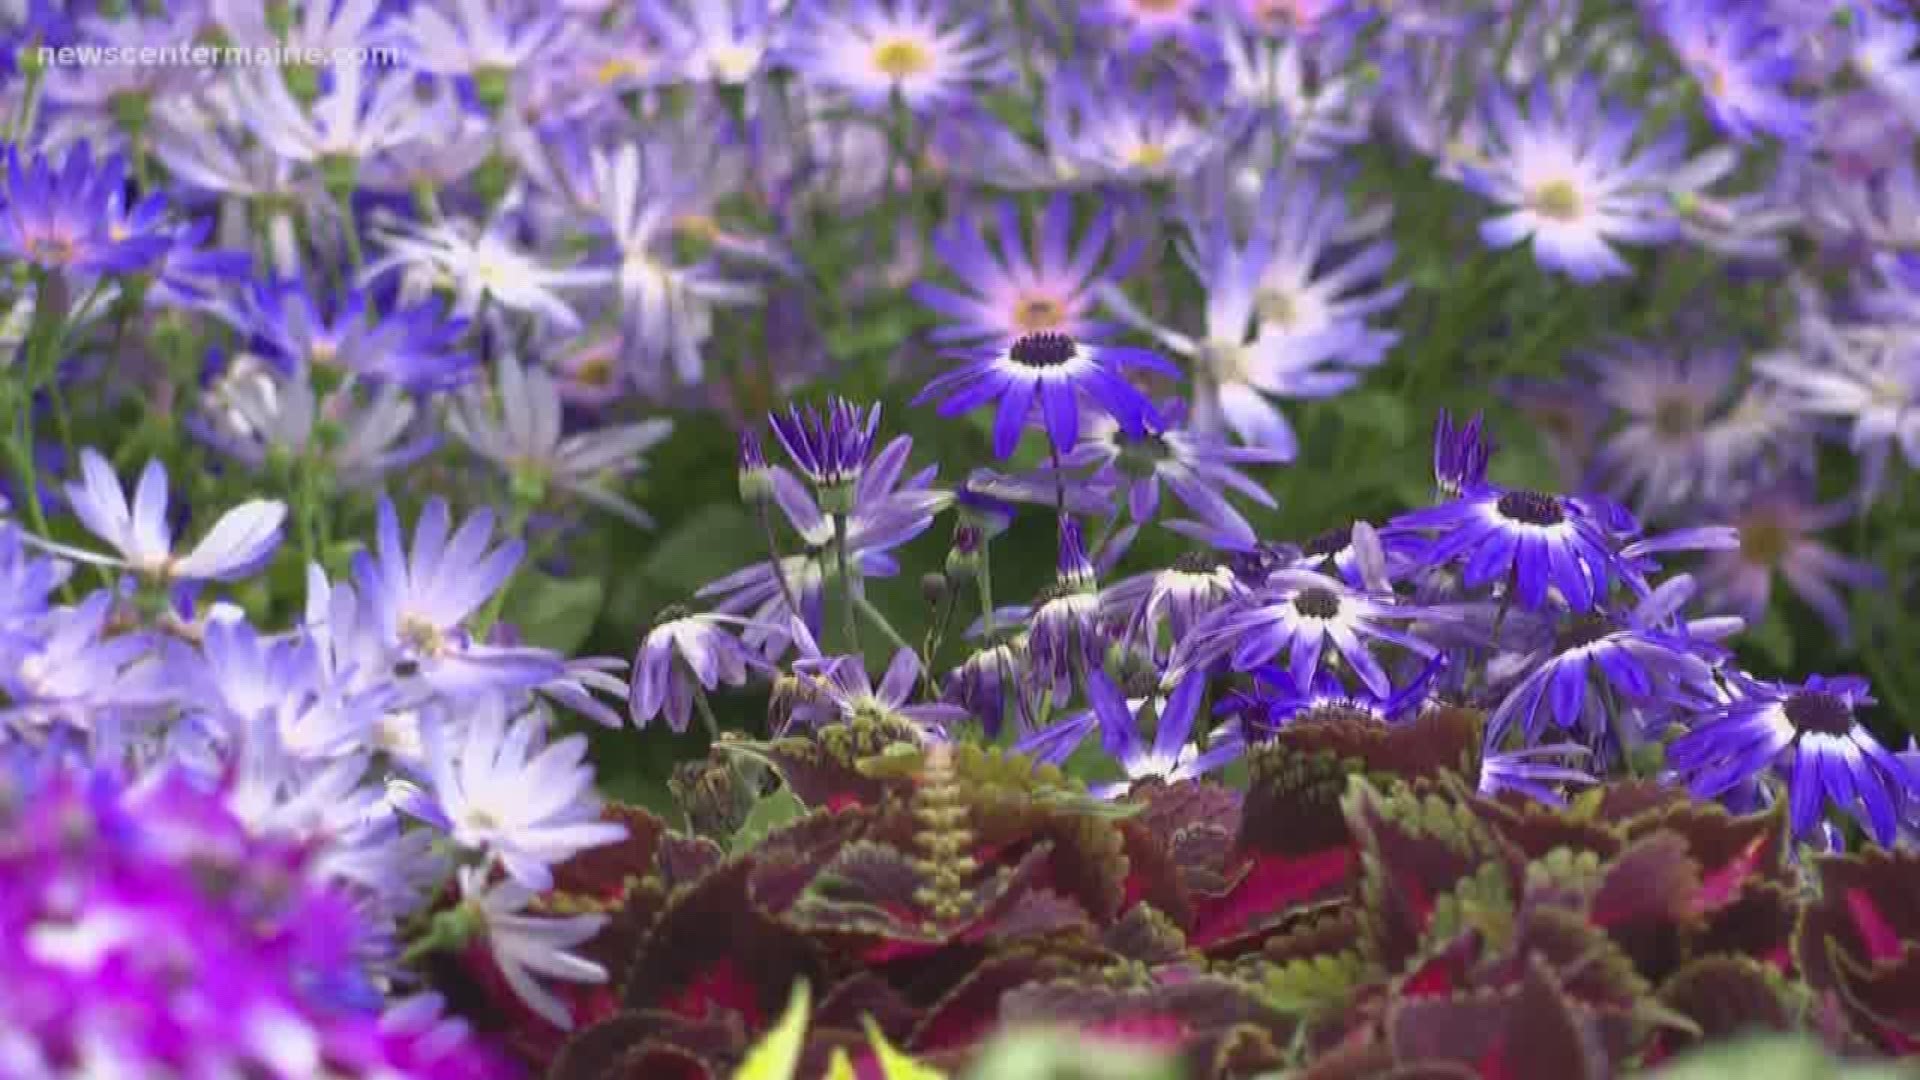 The Maine Flower Show opens Wednesday night at Thompson's Point in Portland.